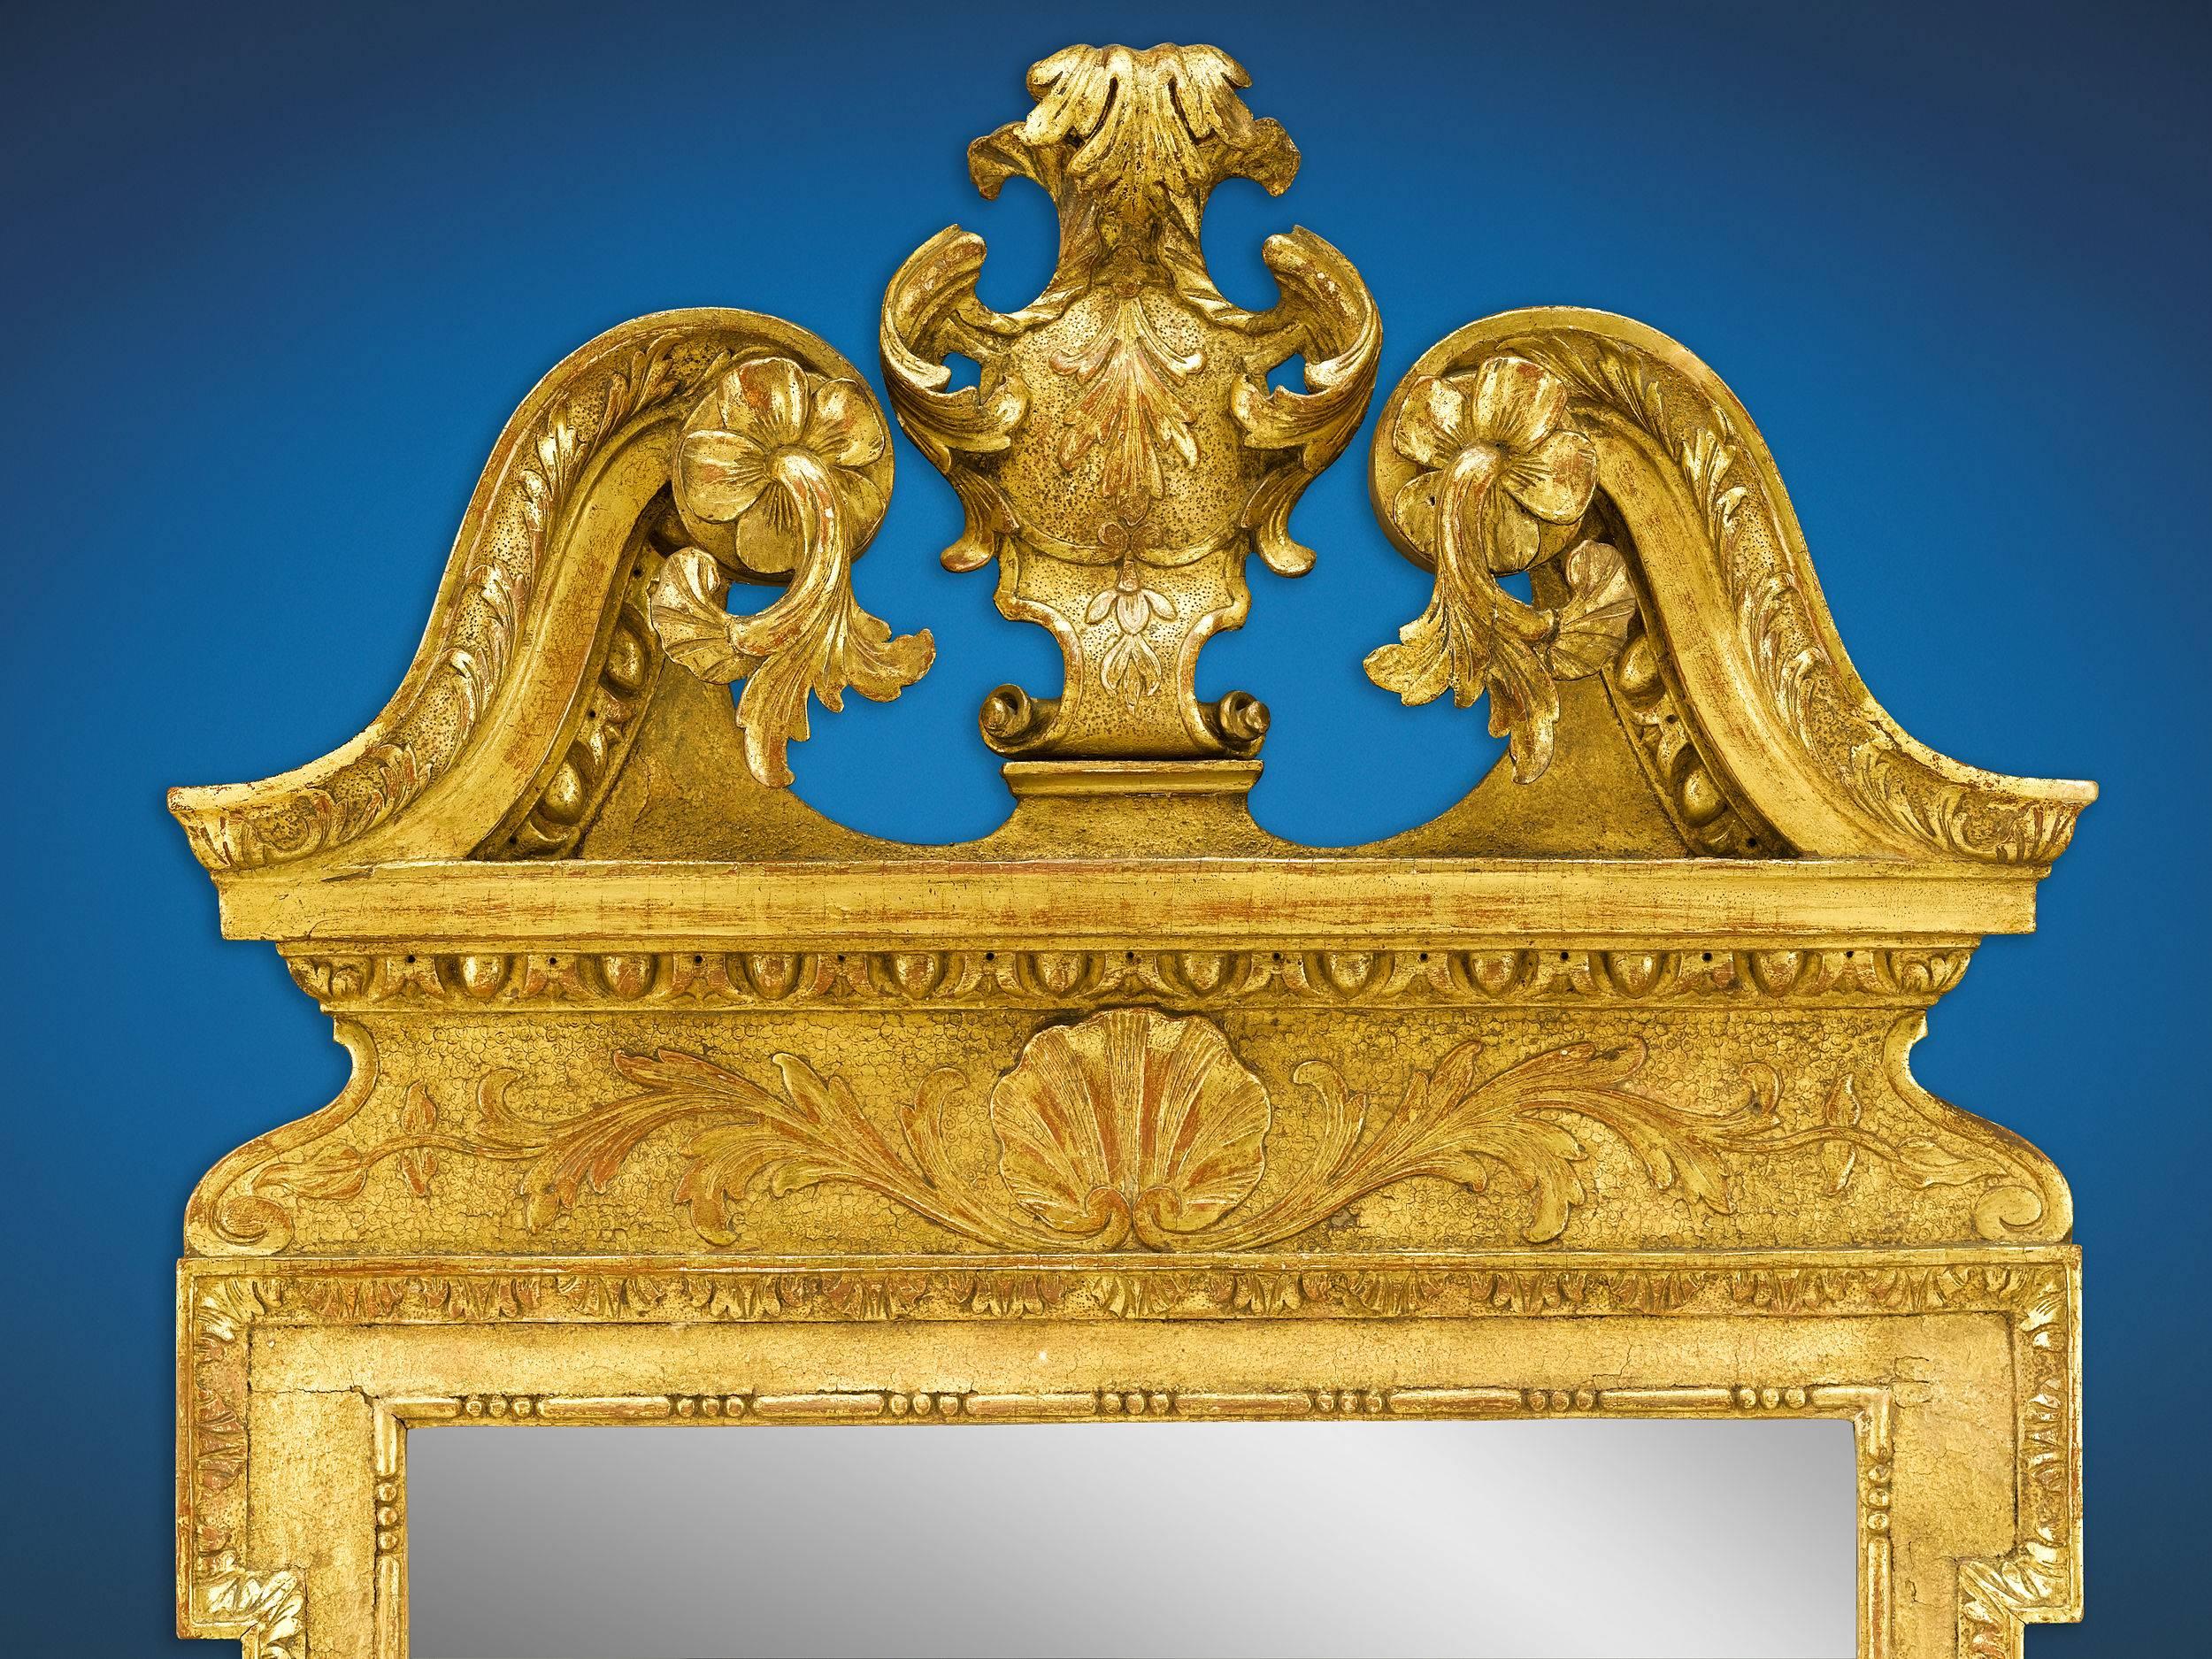 A rare and outstanding George II gesso gilt mirror, marked by a vast array of carved and applied decoration. Crowned with a spectacular broken pediment adorned with acanthus and flowers, the Palladian-style mirror showcases an elegant bead-and-reel